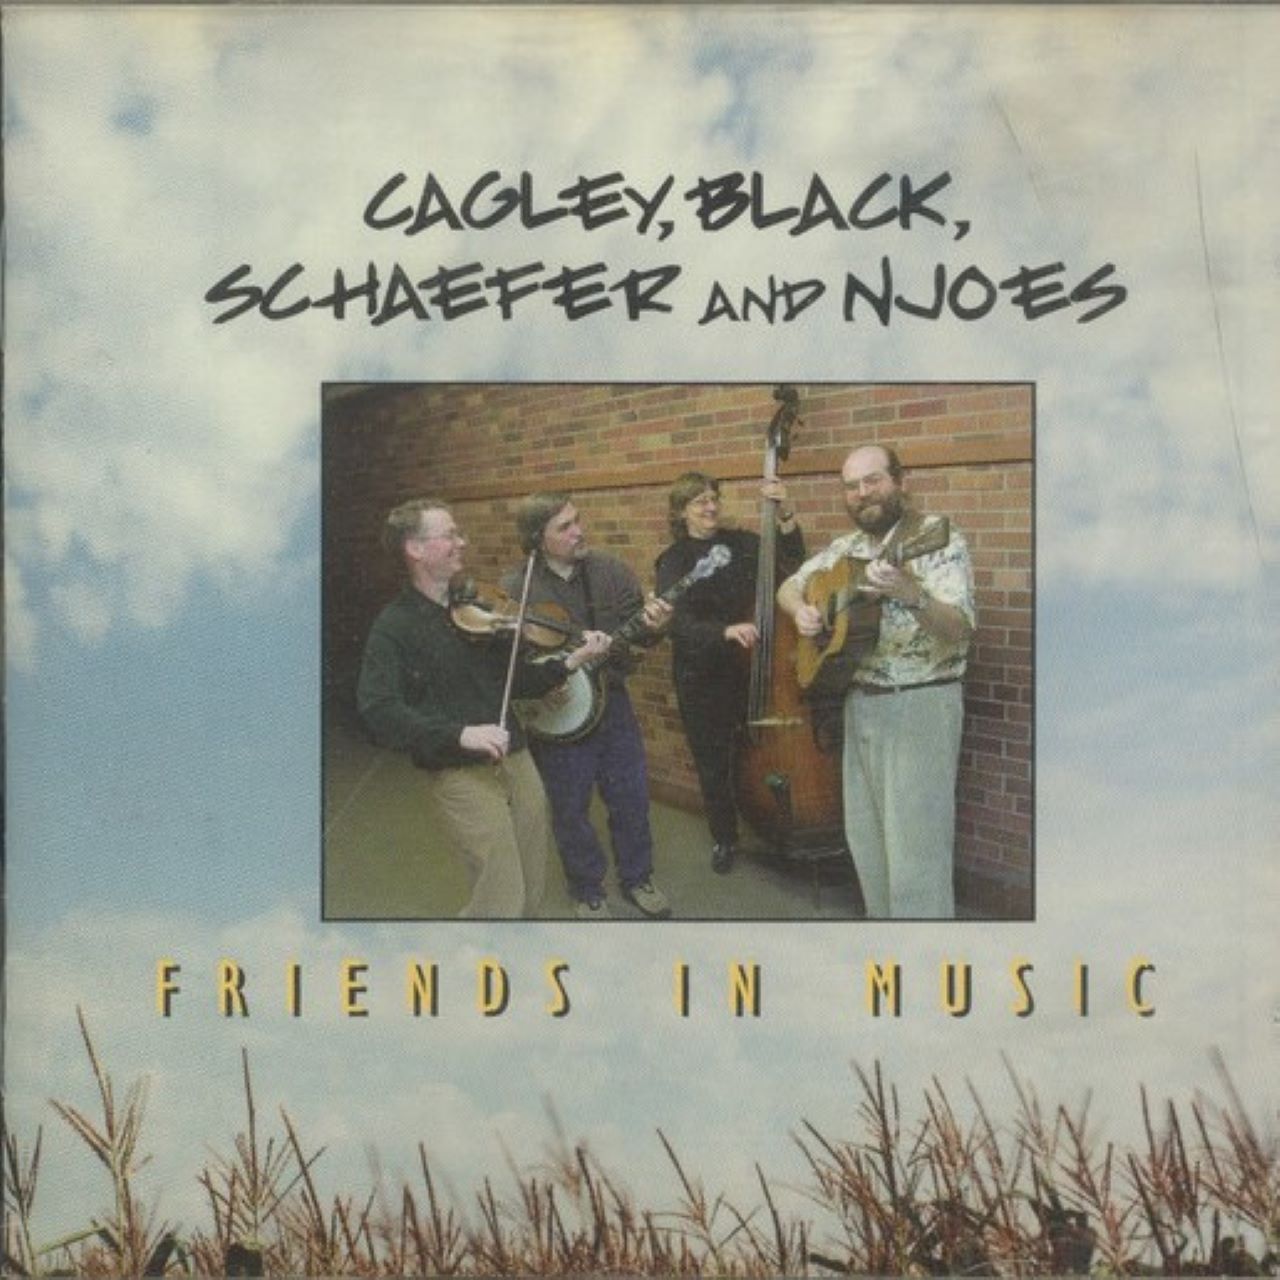 Cagley, Black, Schaefer & Njoes - Friends In Music cover album